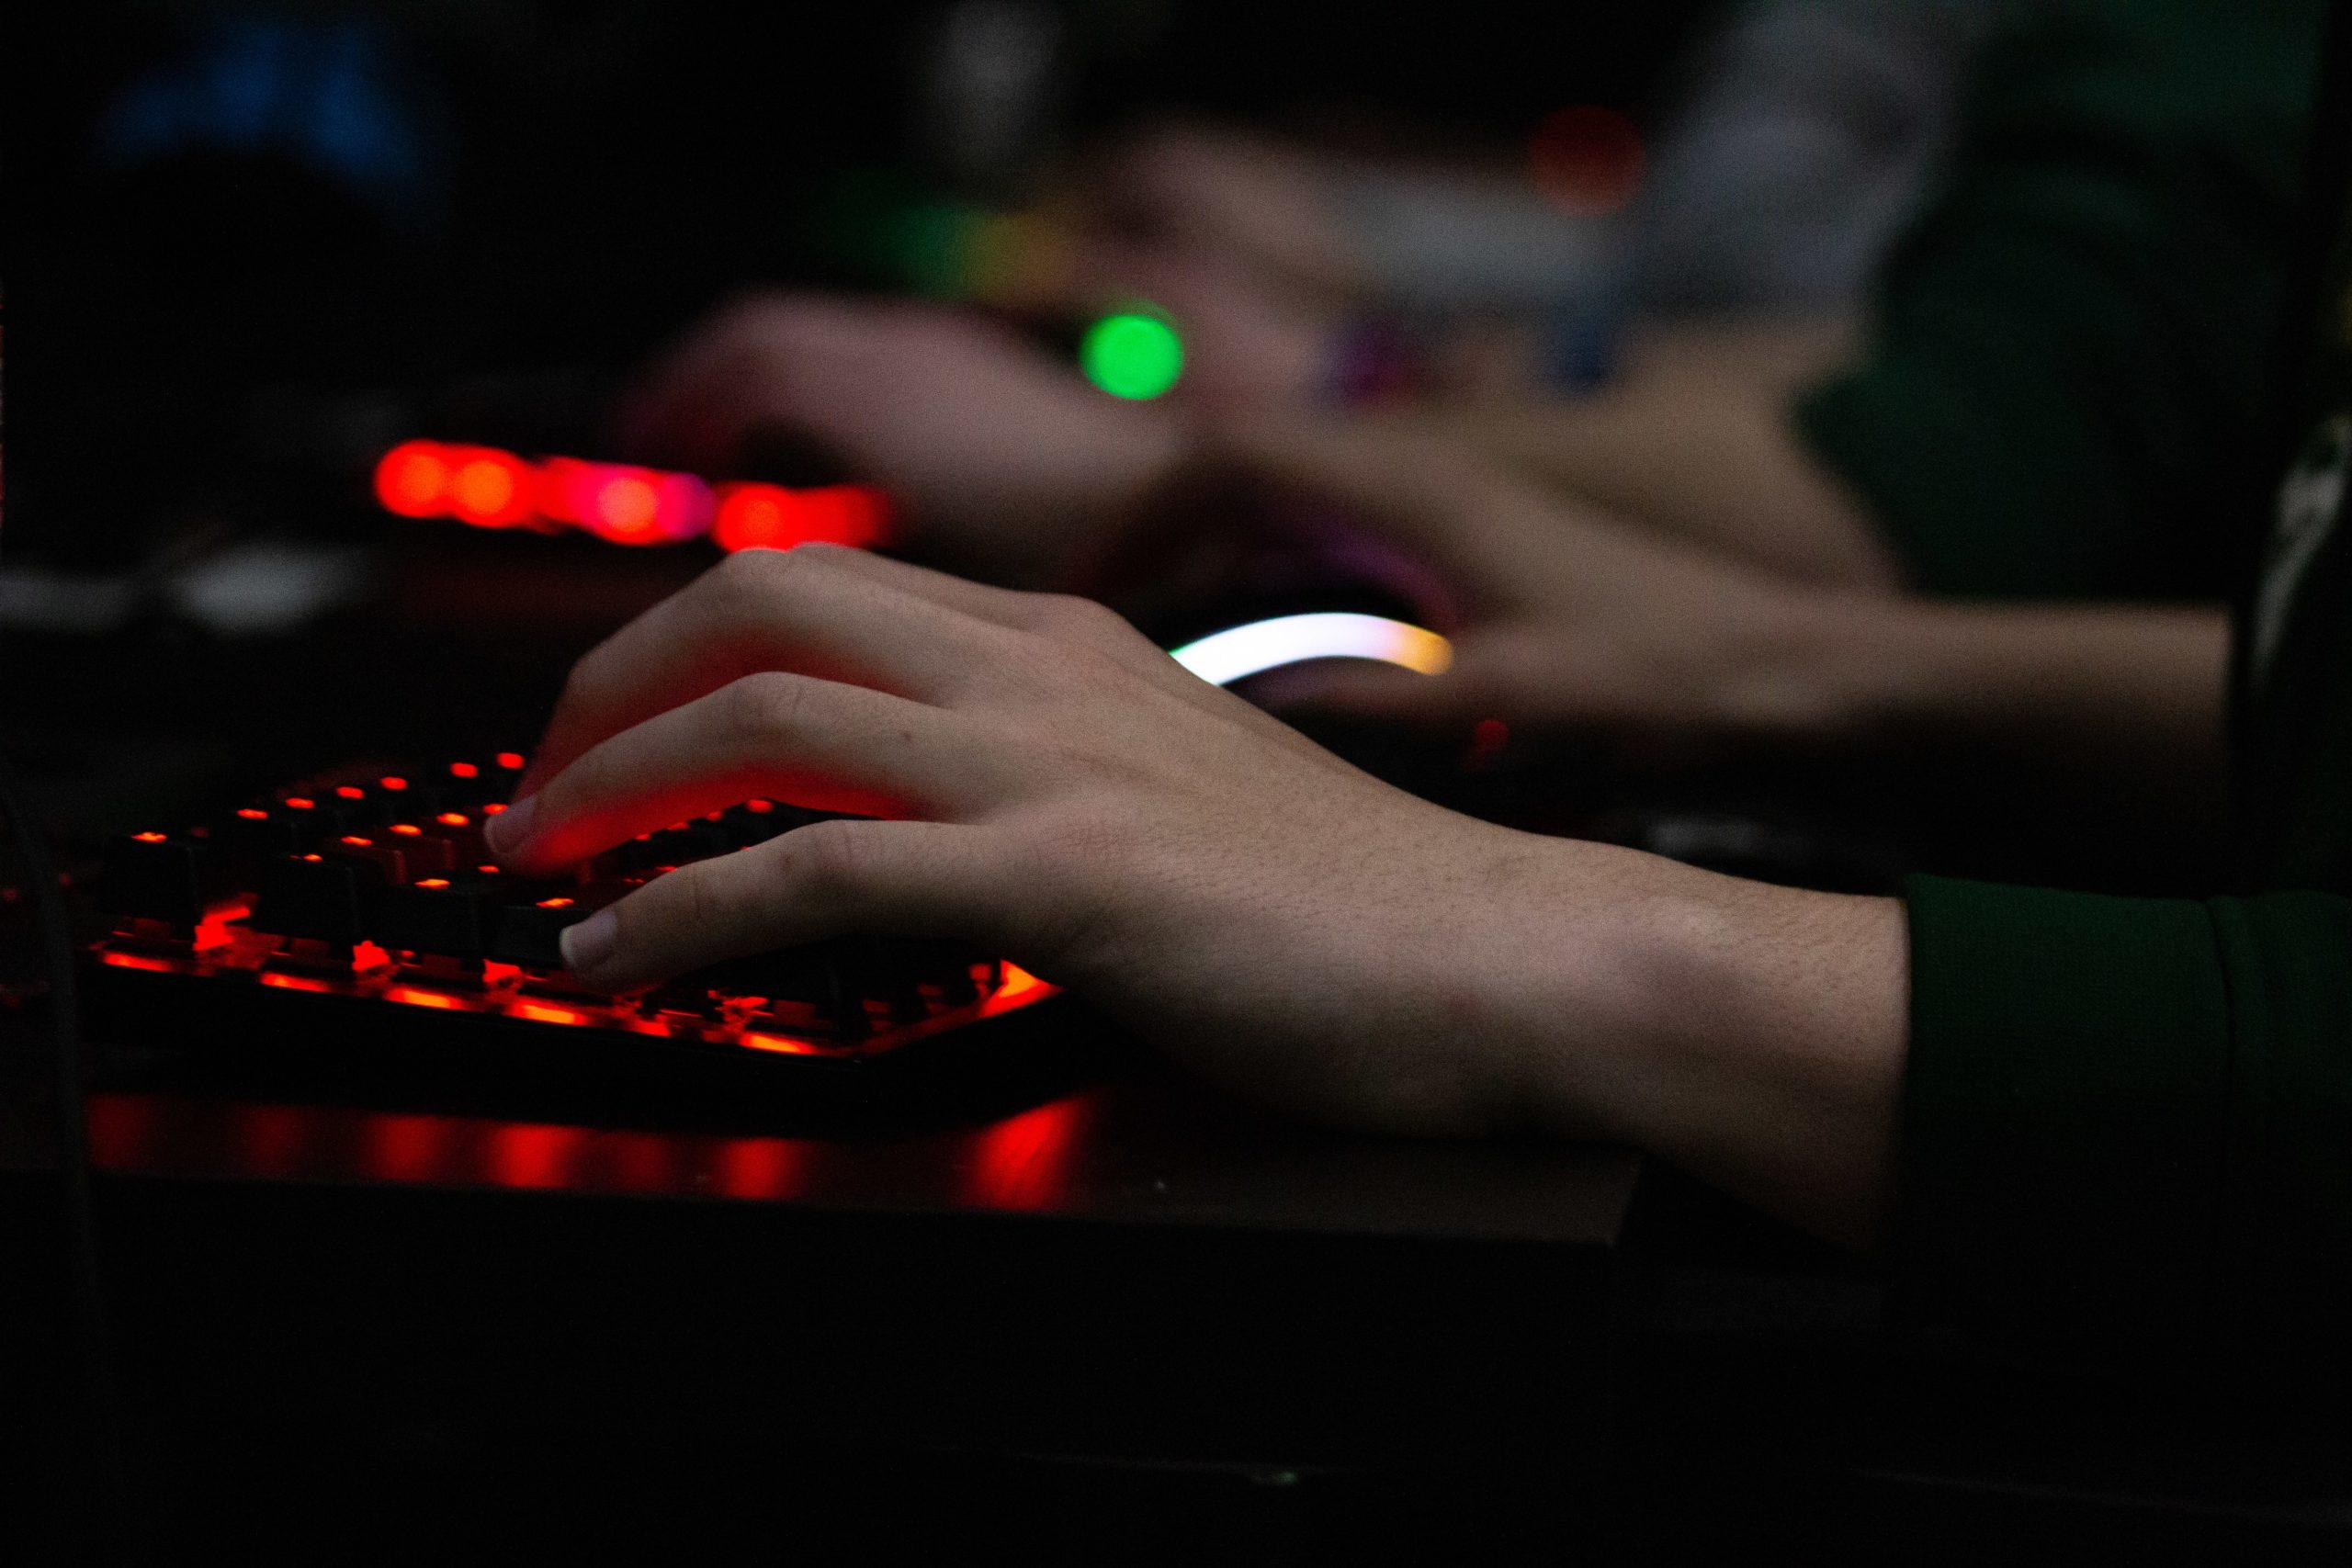 hands on a keyboard backlit with red light